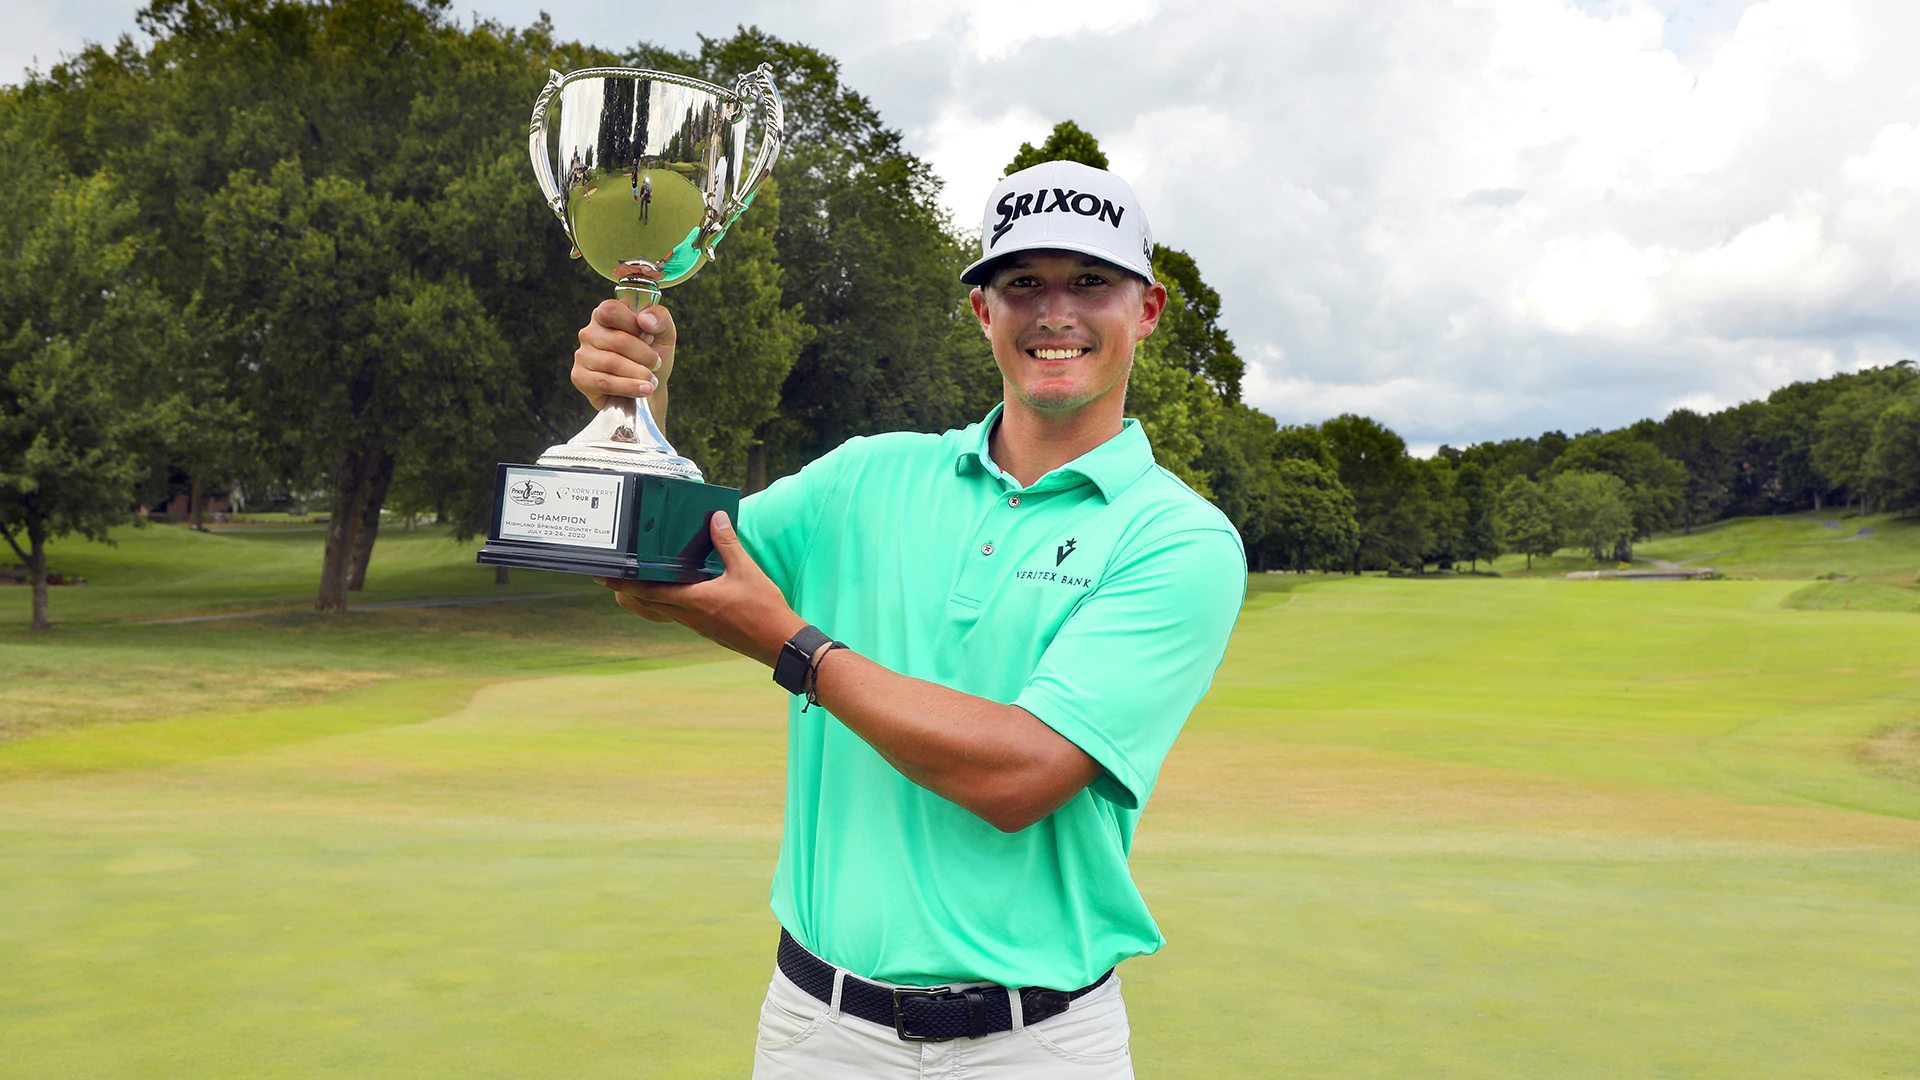 Max McGreevy wins 1st KFT title in Missouri after closing 64